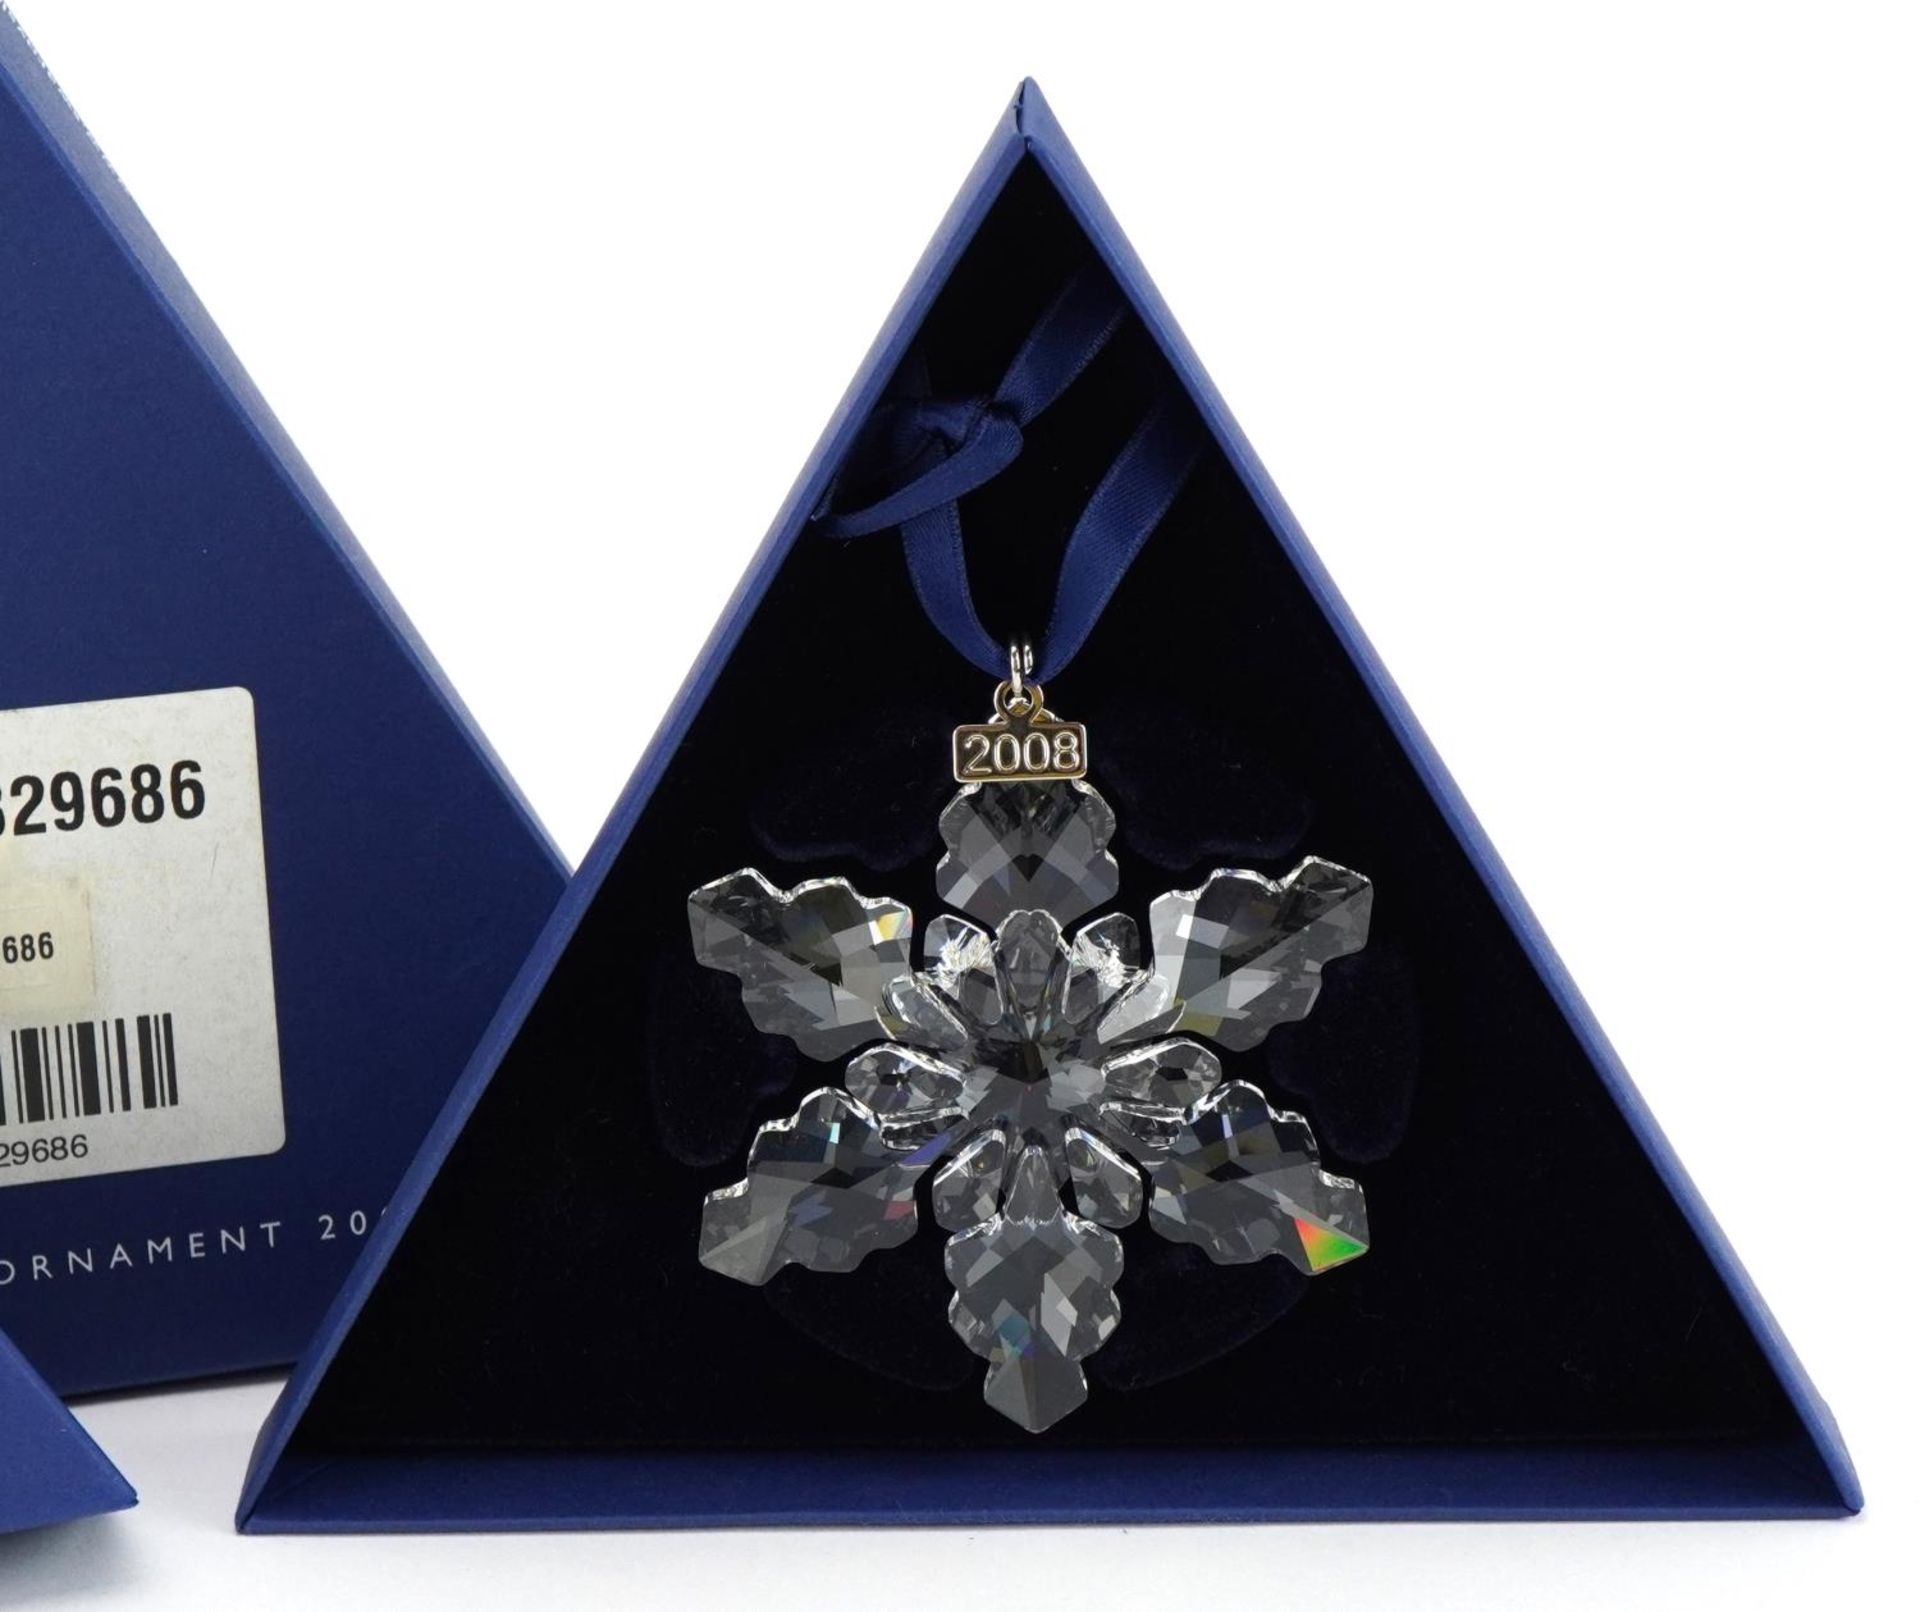 Two Swarovski Crystal Christmas ornaments with boxes comprising dates 2008 and 2009 - Image 3 of 4